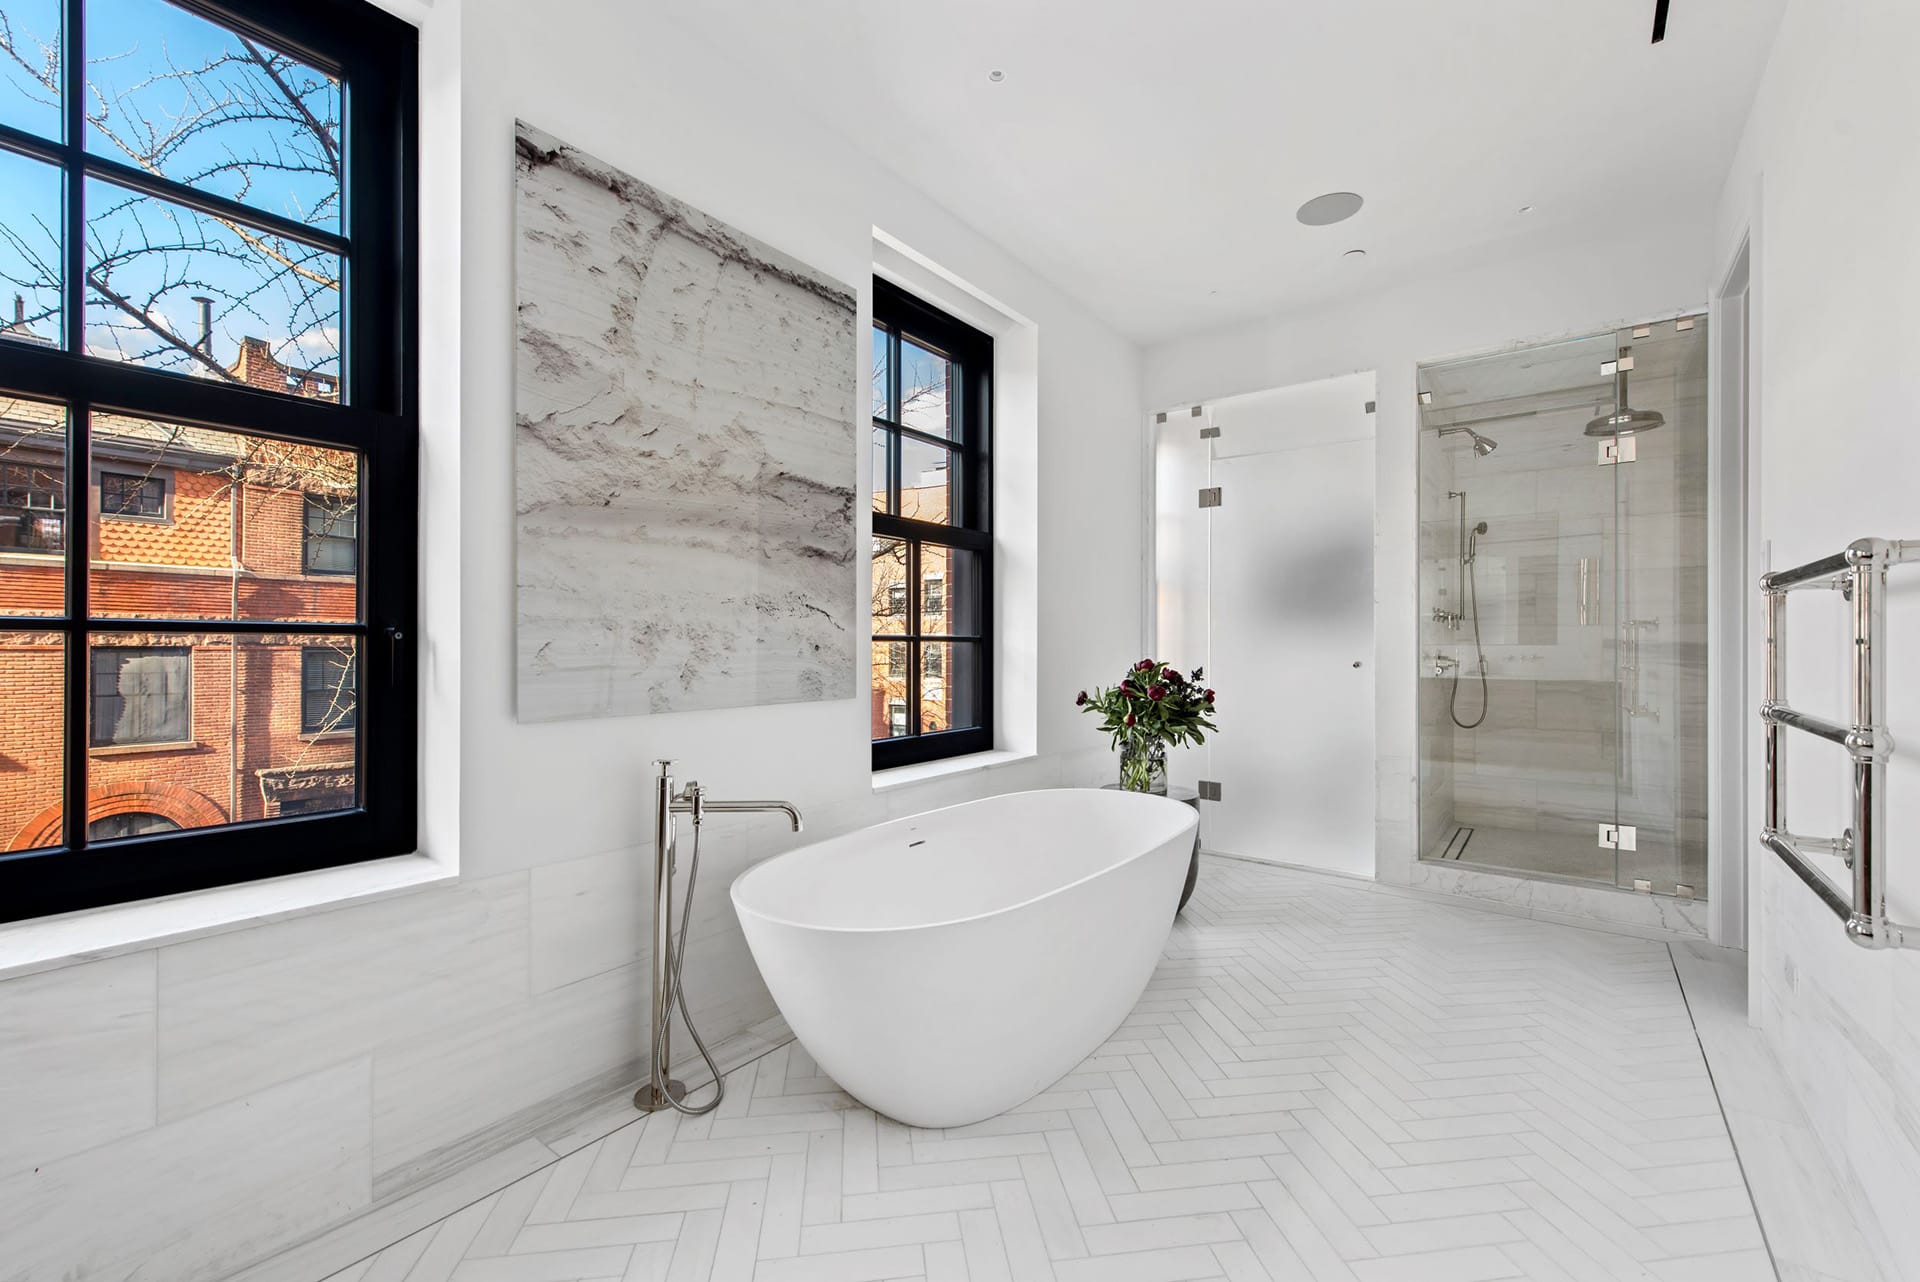 Primary bath with a freestanding tub in between two windows, a separate shower stall, heated towel bar, and white tile flooring.